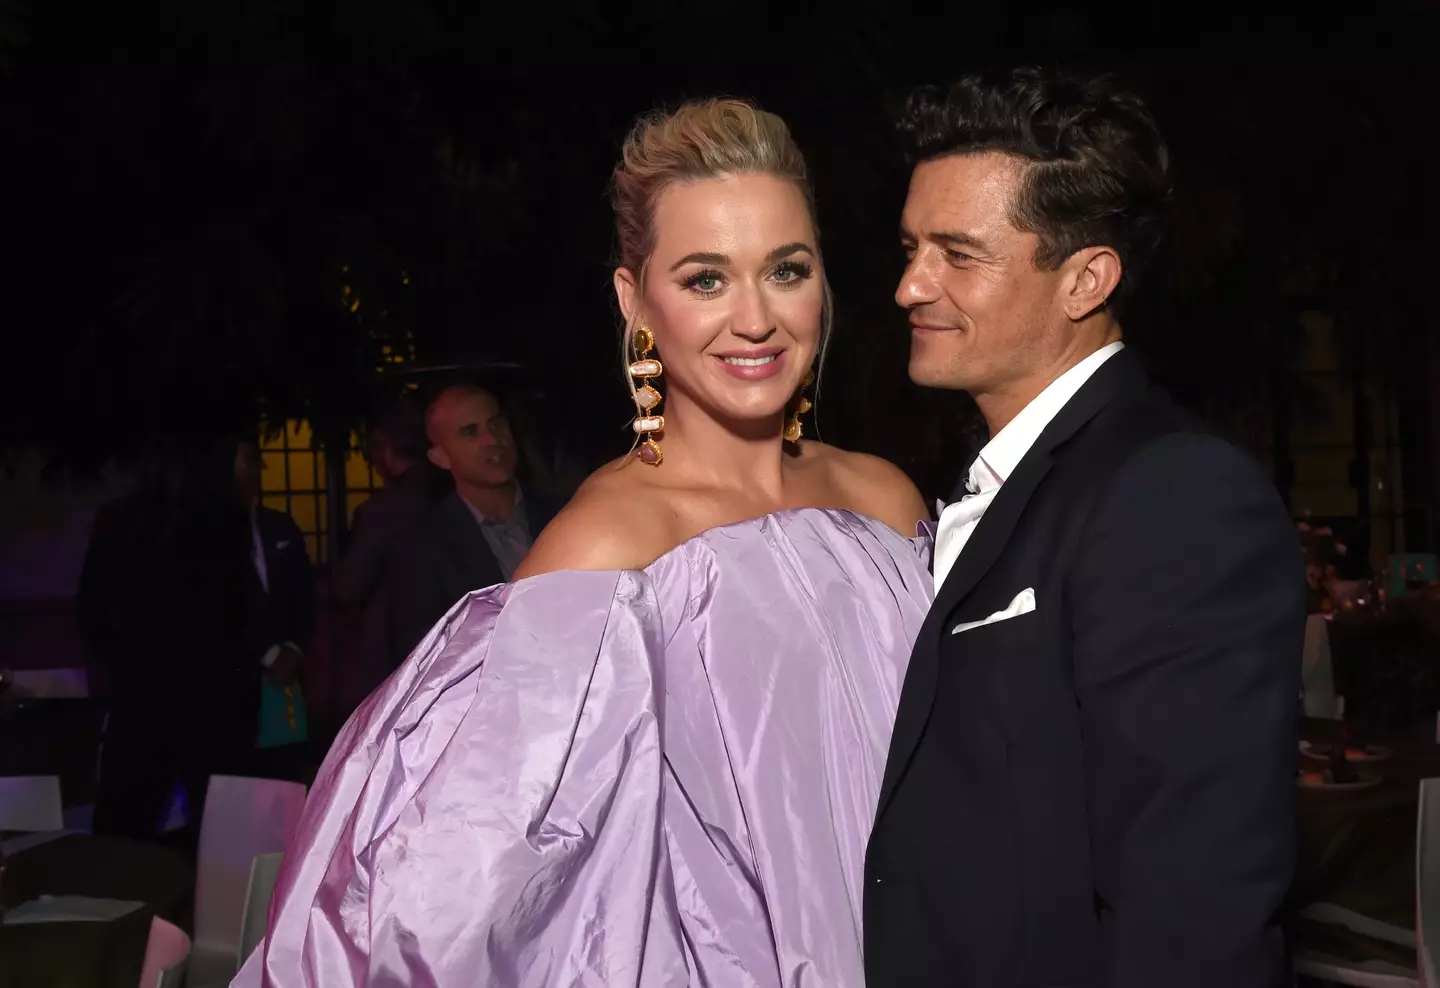 Katy Perry and Orlando Bloom are engaged and share a child.